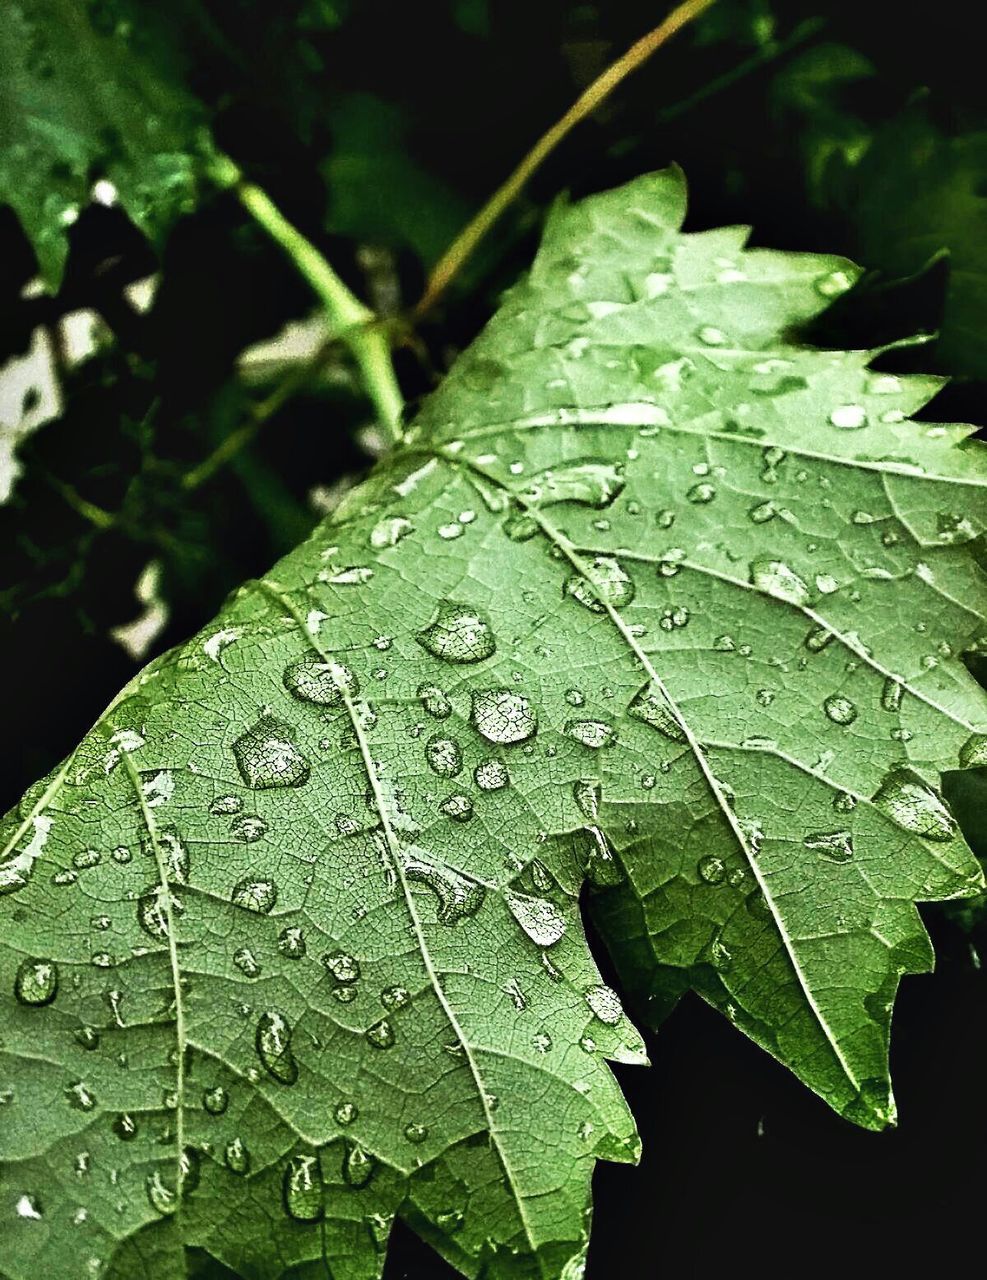 leaf, drop, wet, water, leaf vein, close-up, dew, raindrop, nature, growth, focus on foreground, green color, freshness, fragility, rain, season, plant, leaves, beauty in nature, weather